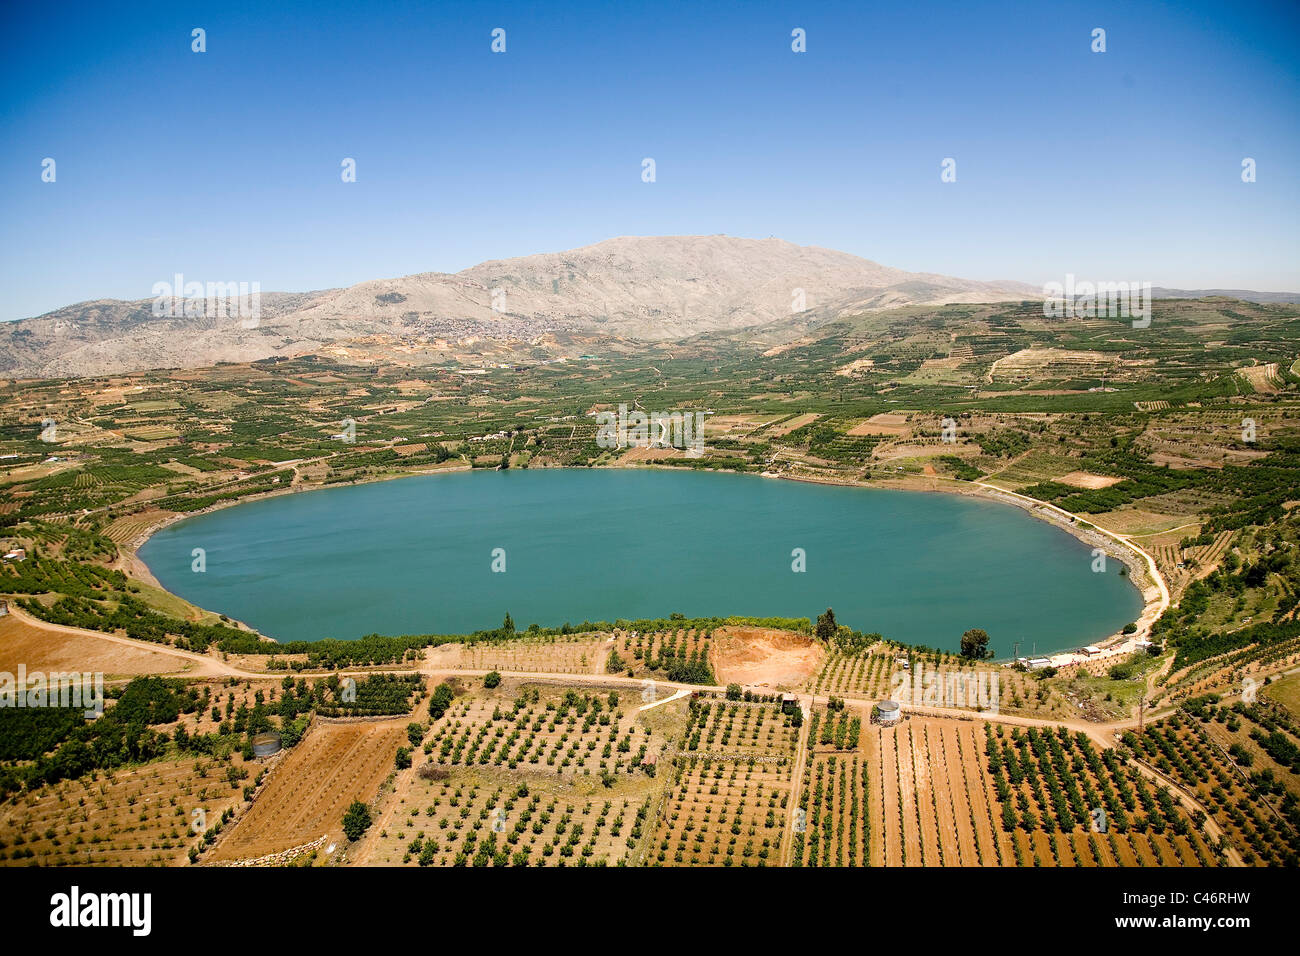 Aerial photograph of the Ram pool in the northern Golan Heights Stock Photo